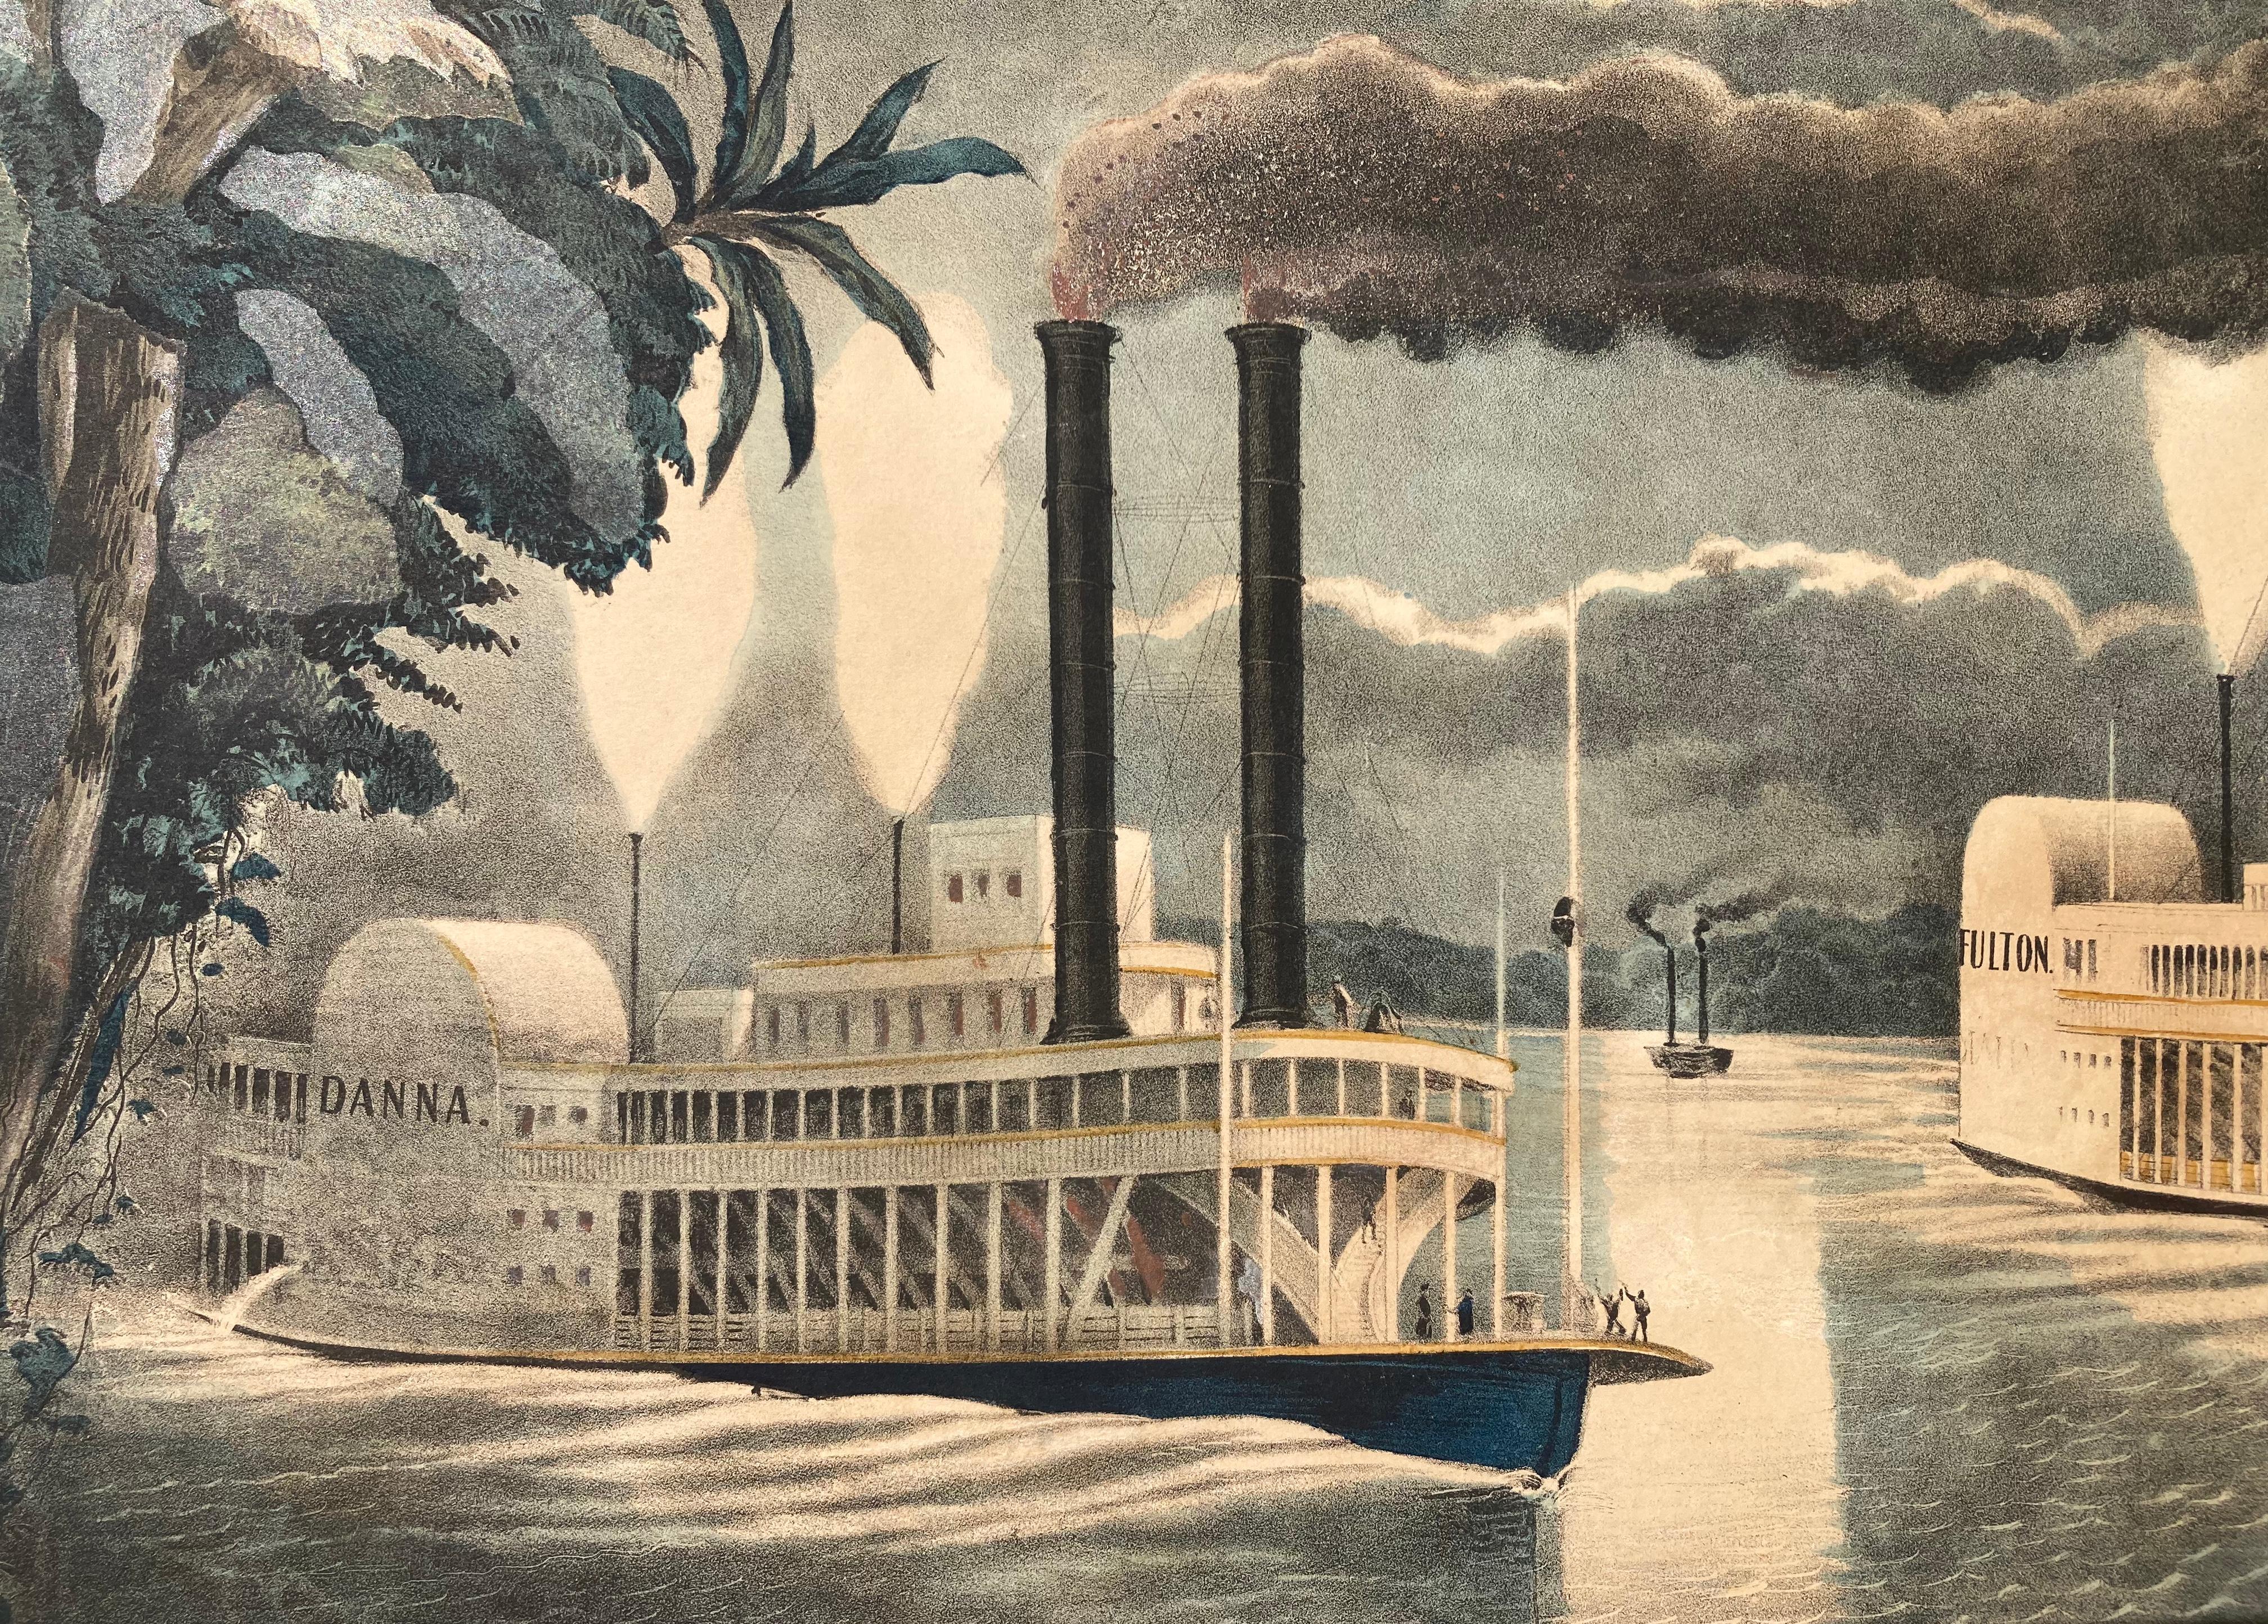 MIDNIGHT RACE ON THE MISSISSIPPI - Large Very Rare American Riverboat Litho 1870 - American Realist Print by Thomas Kelly